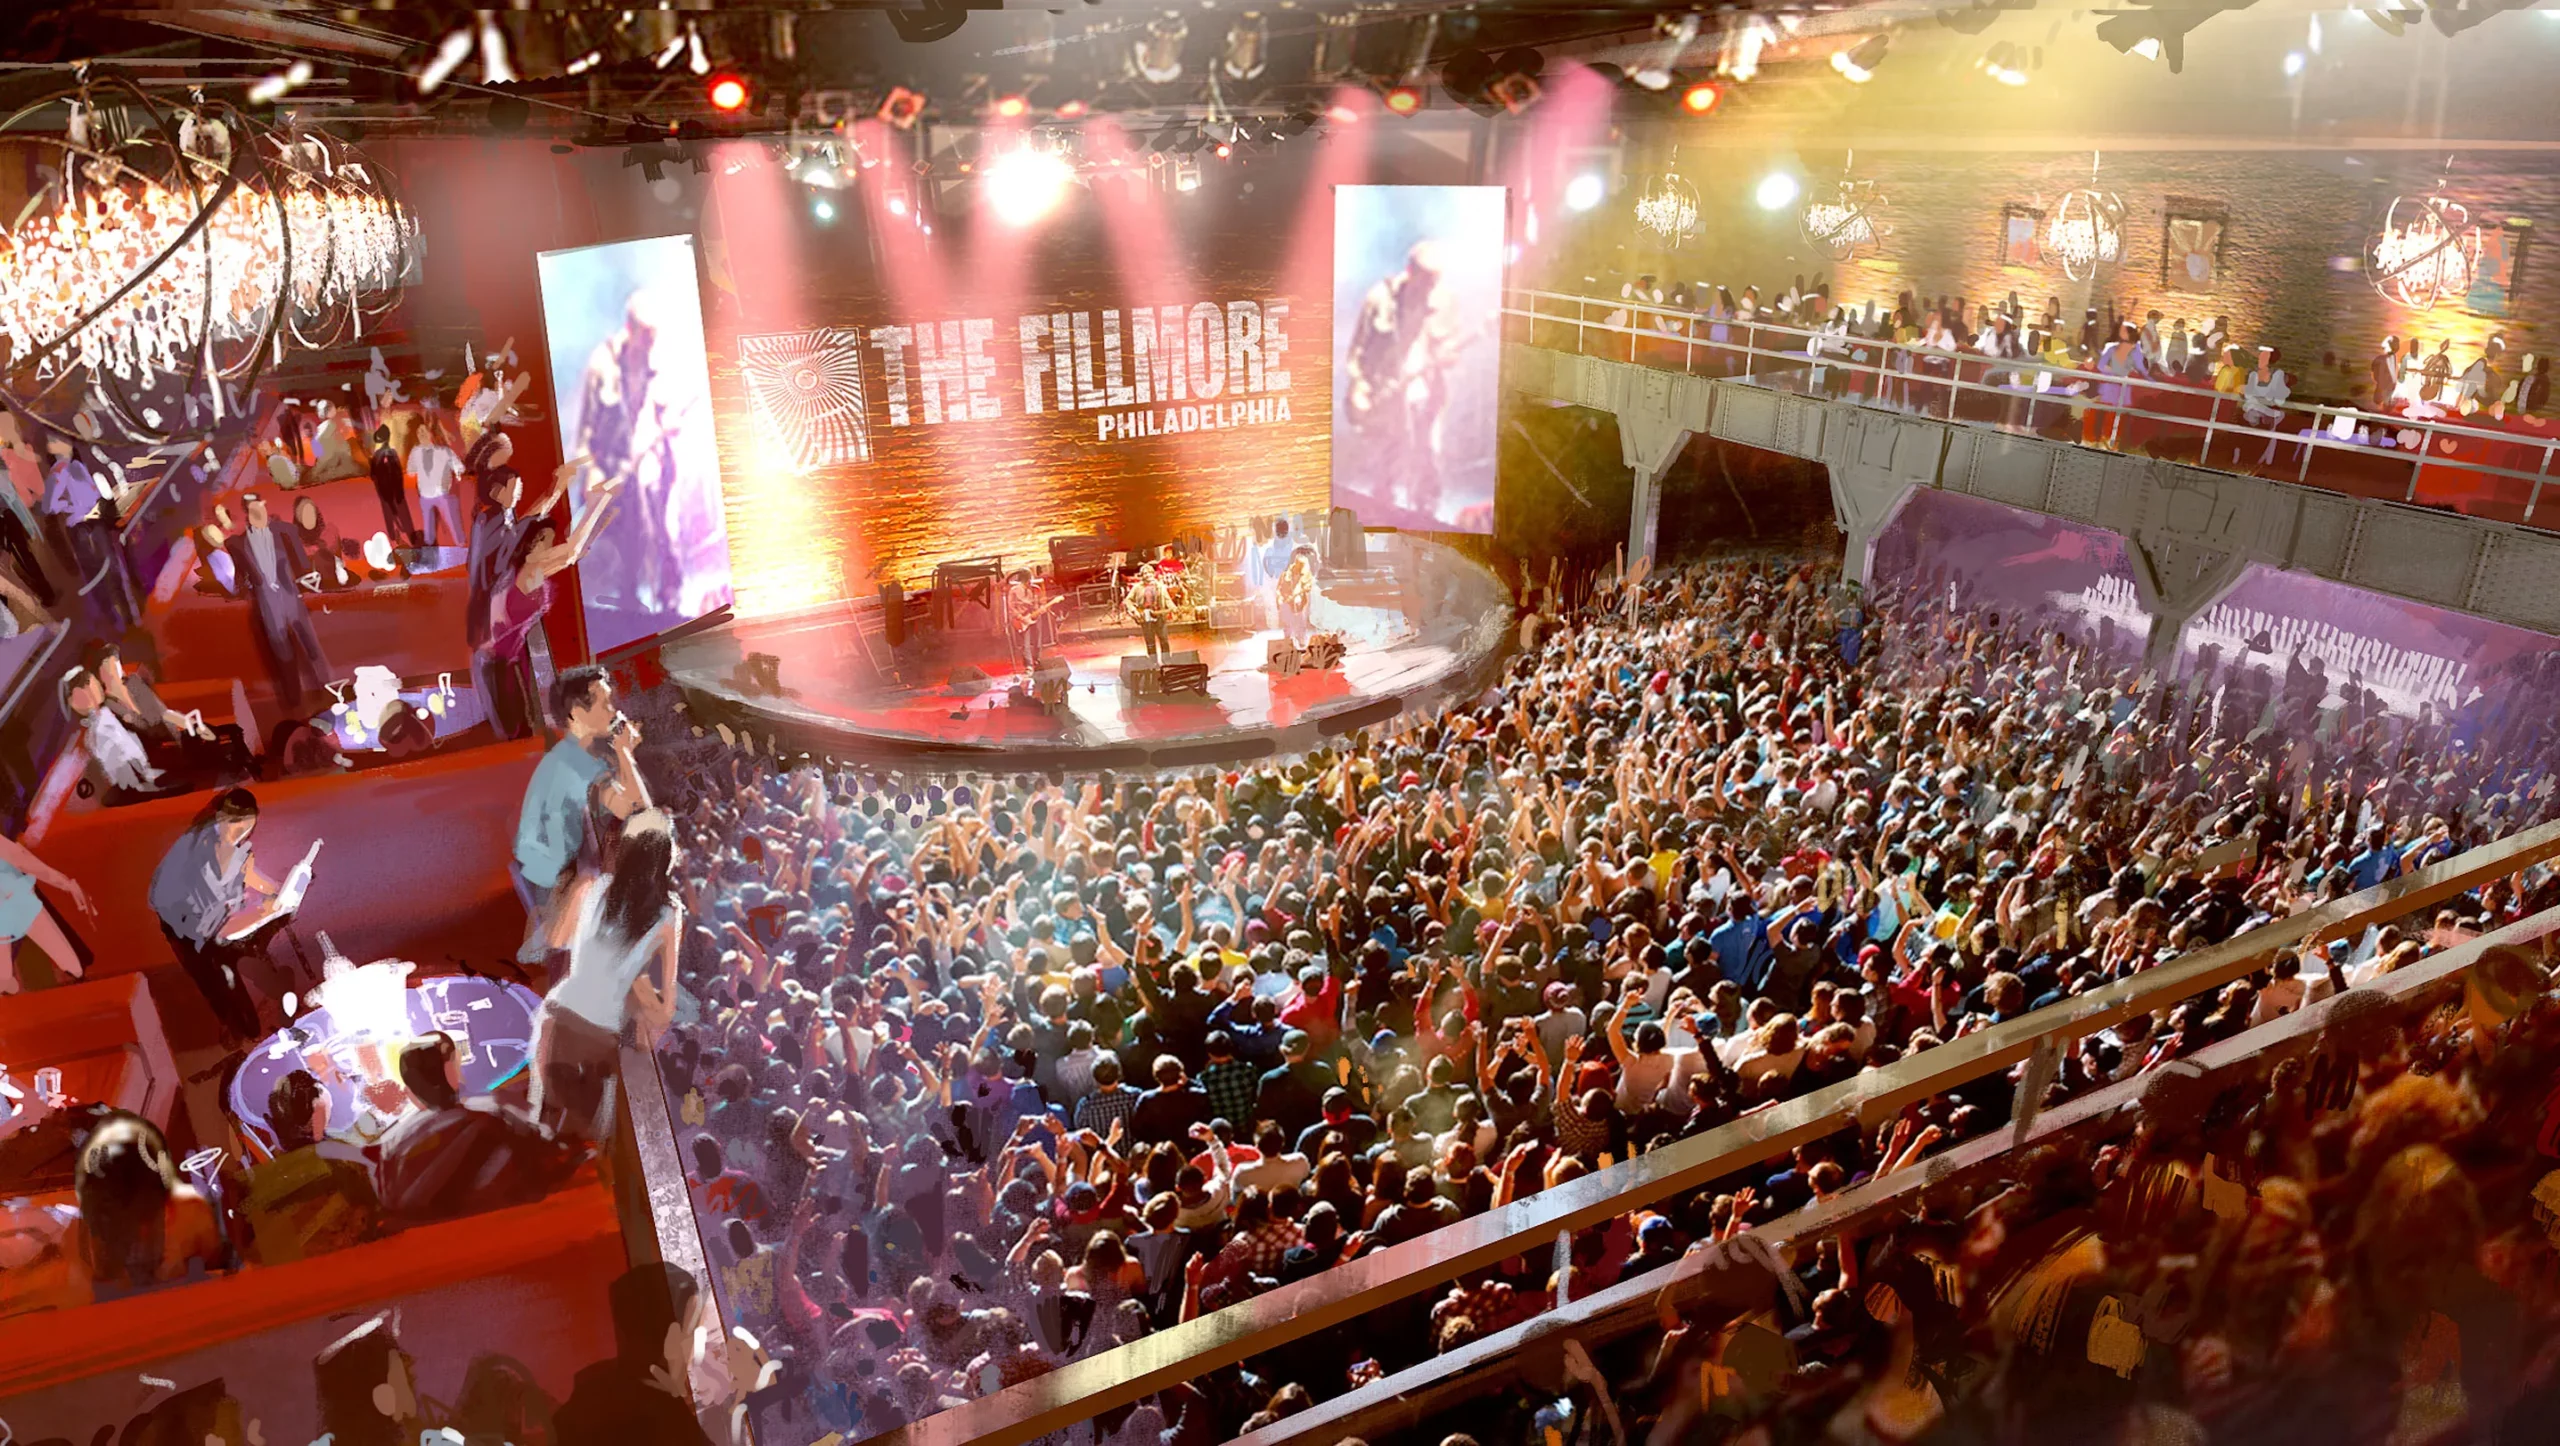 The Fillmore scaled